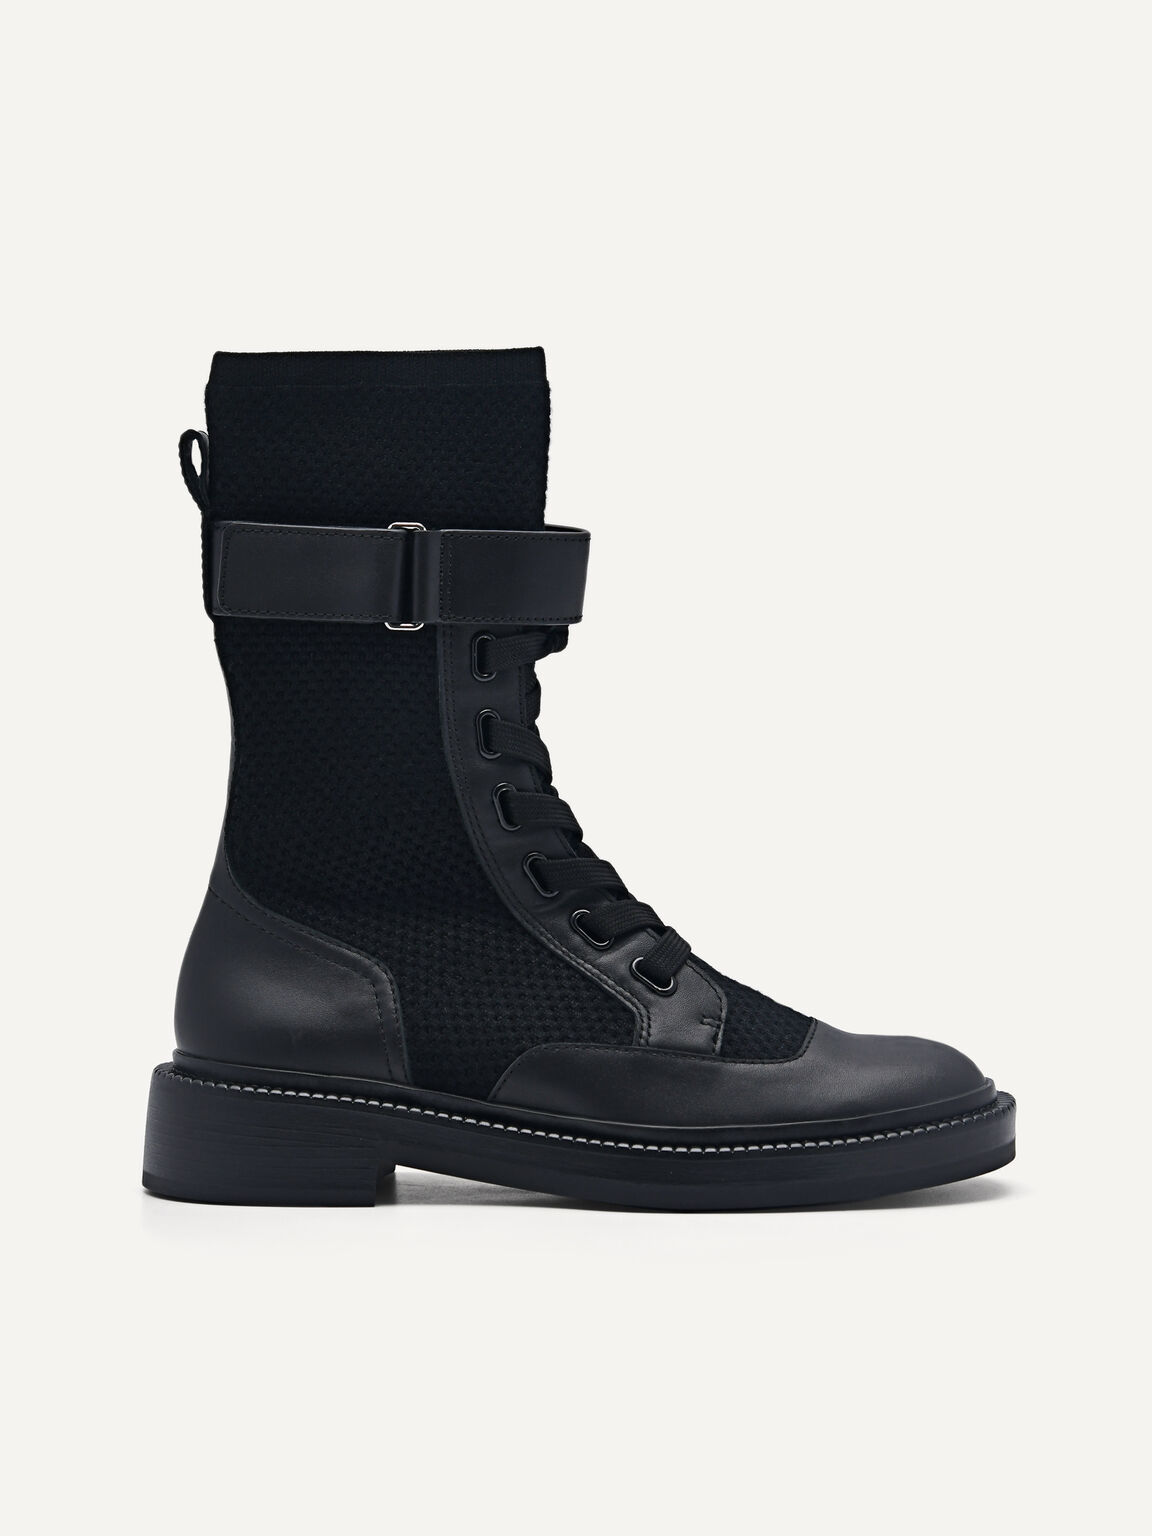 Leather Marianne Boots, Black